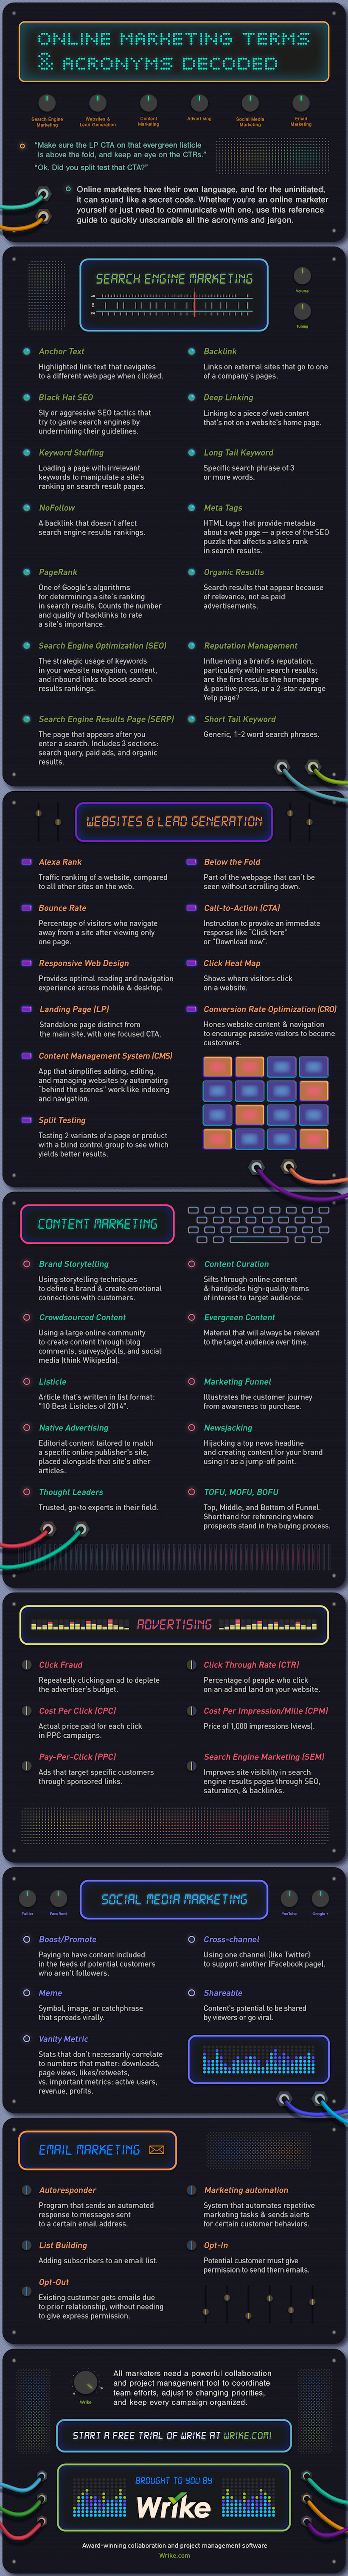 A-Z Glossary of Online Marketing Terms (Infographic)